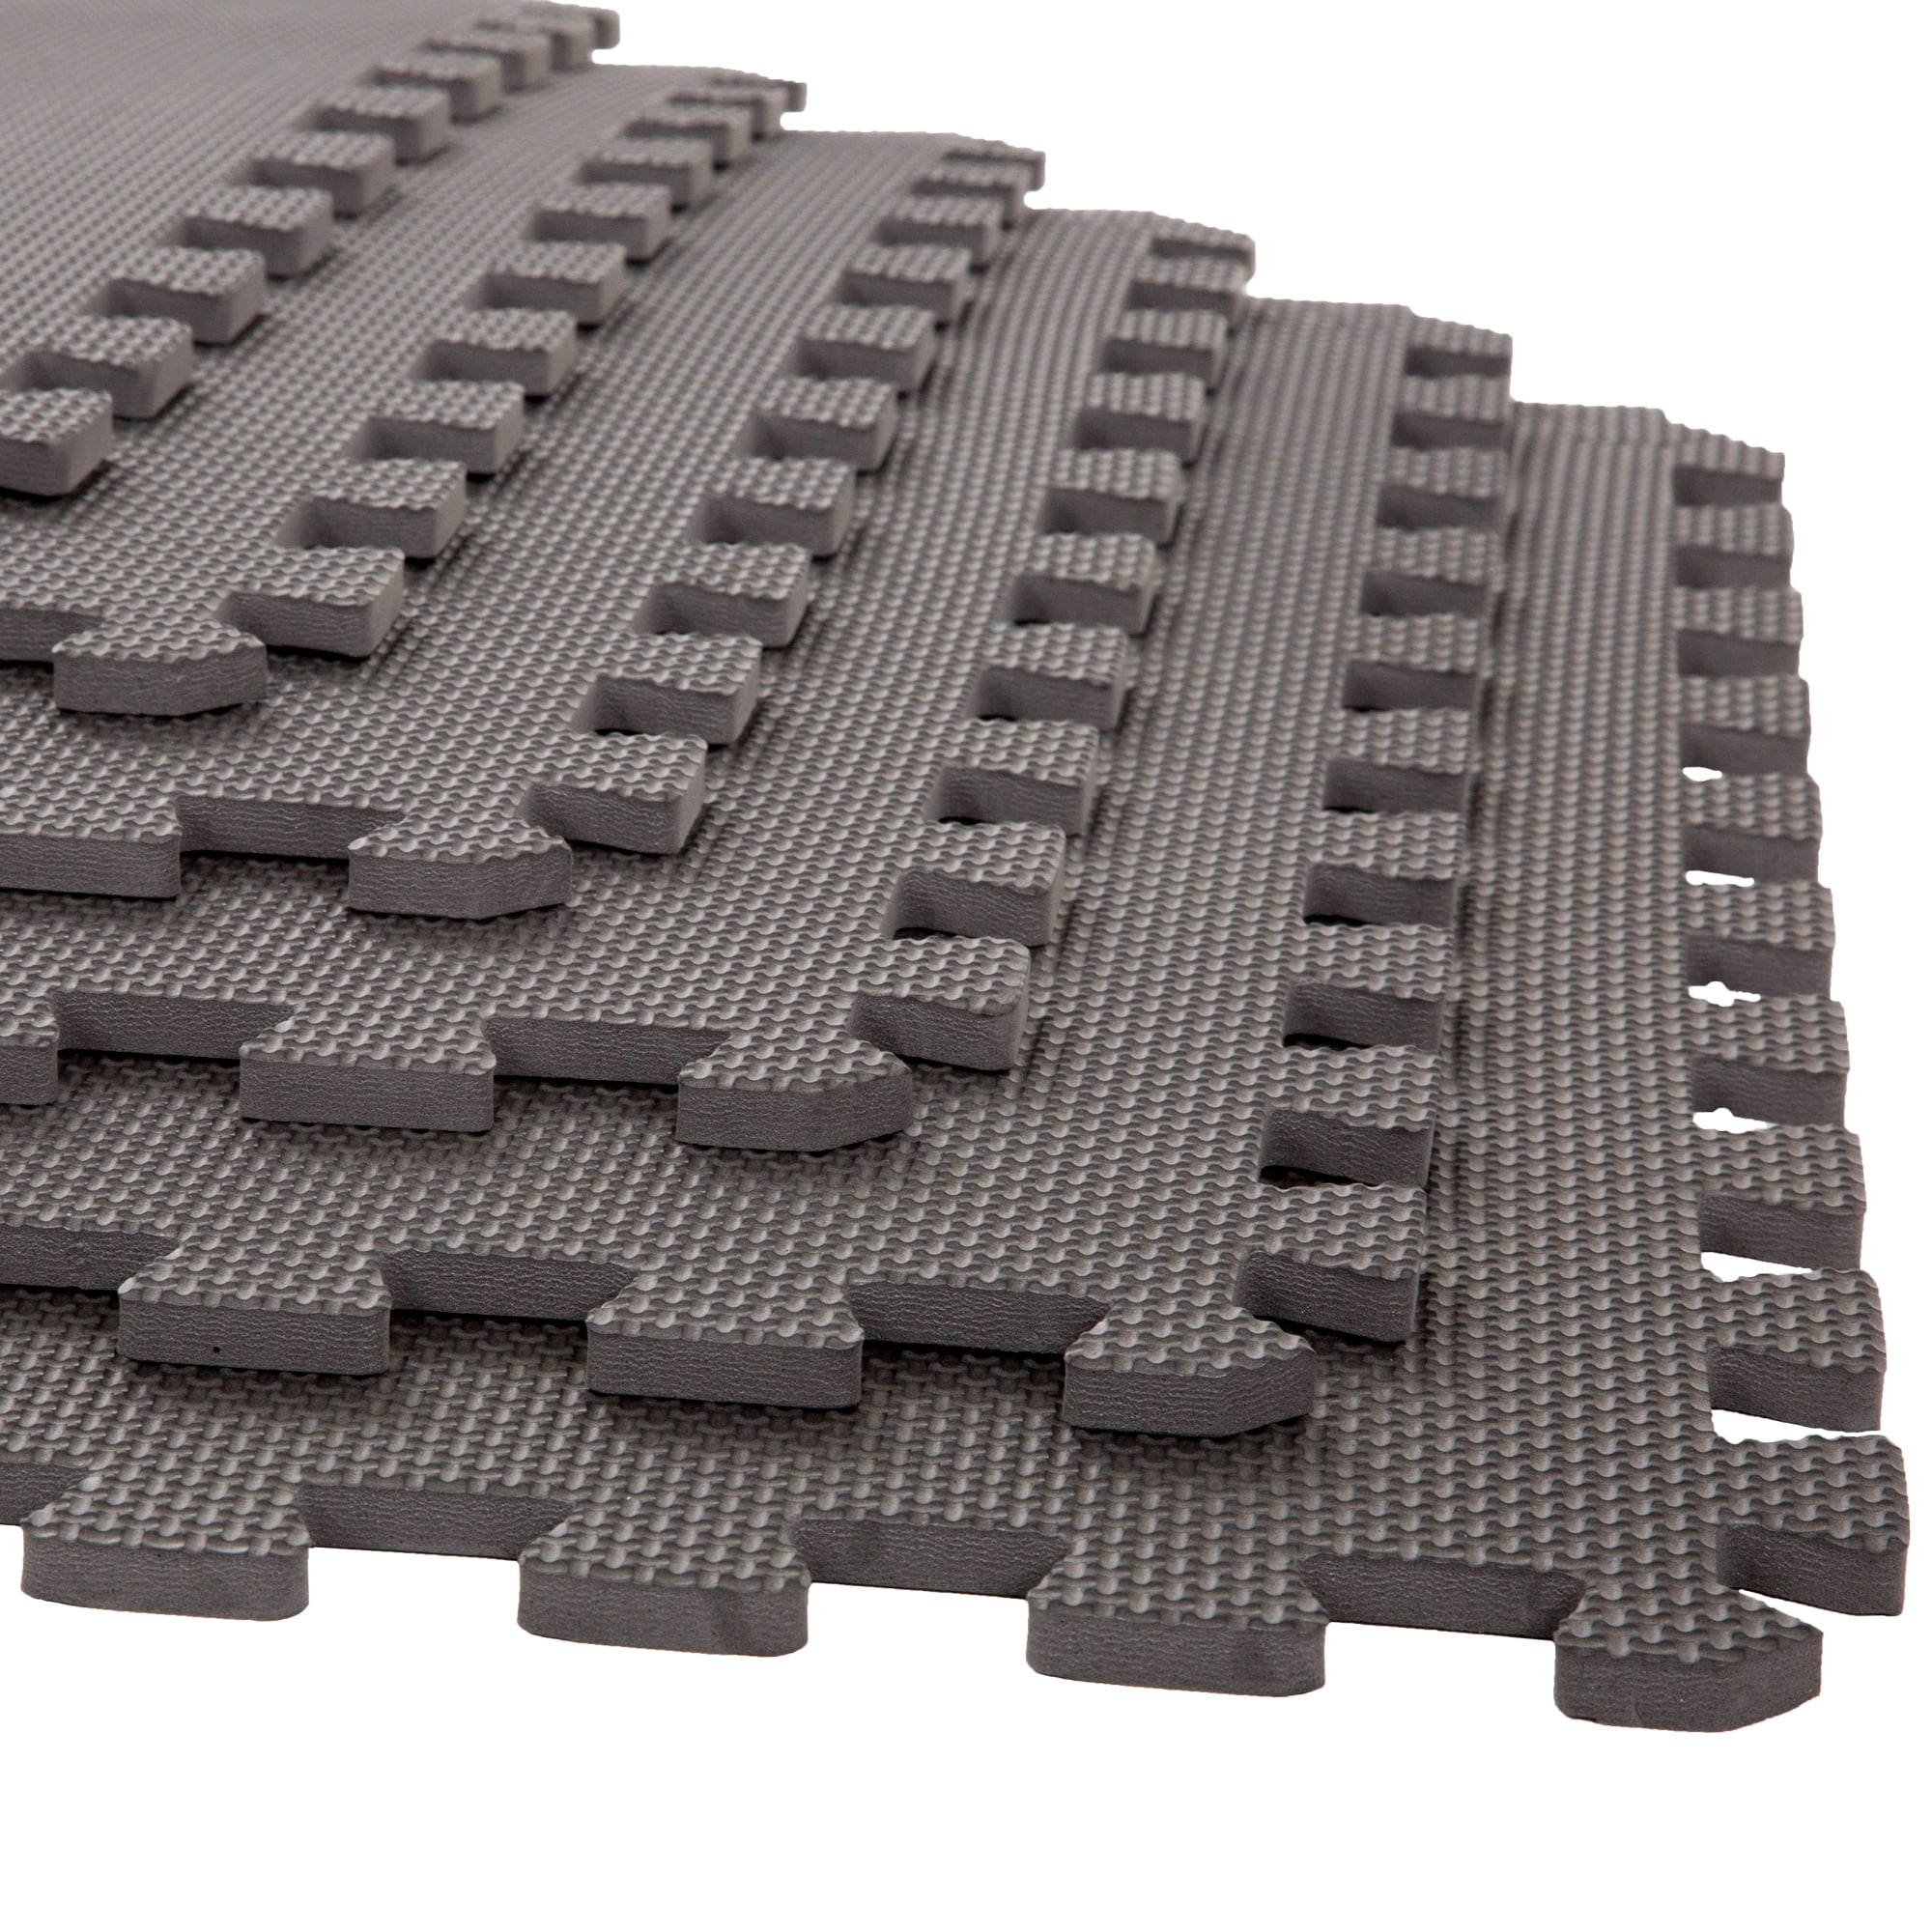 Foam Mat Floor Tiles 6PC Set - Interlocking EVA Foam Padding with Soft  Carpet Top for Exercise and Yoga by Stalwart (Gray) - On Sale - Bed Bath &  Beyond - 26062412